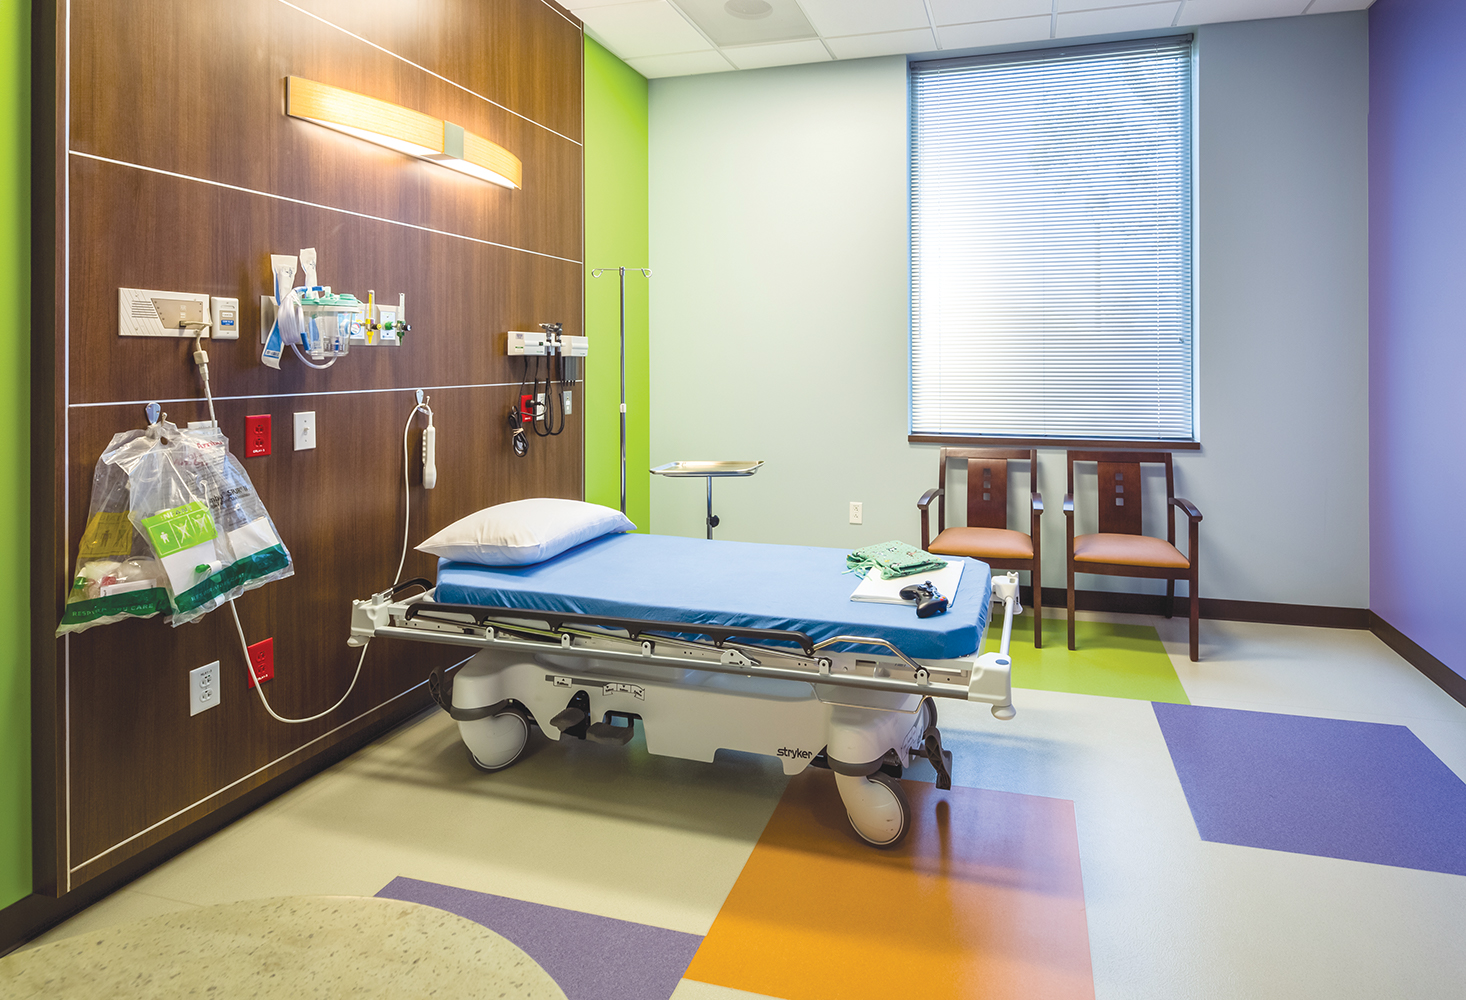 Bowe patient room lighting fixture mounted horizontally over a hospital bed.